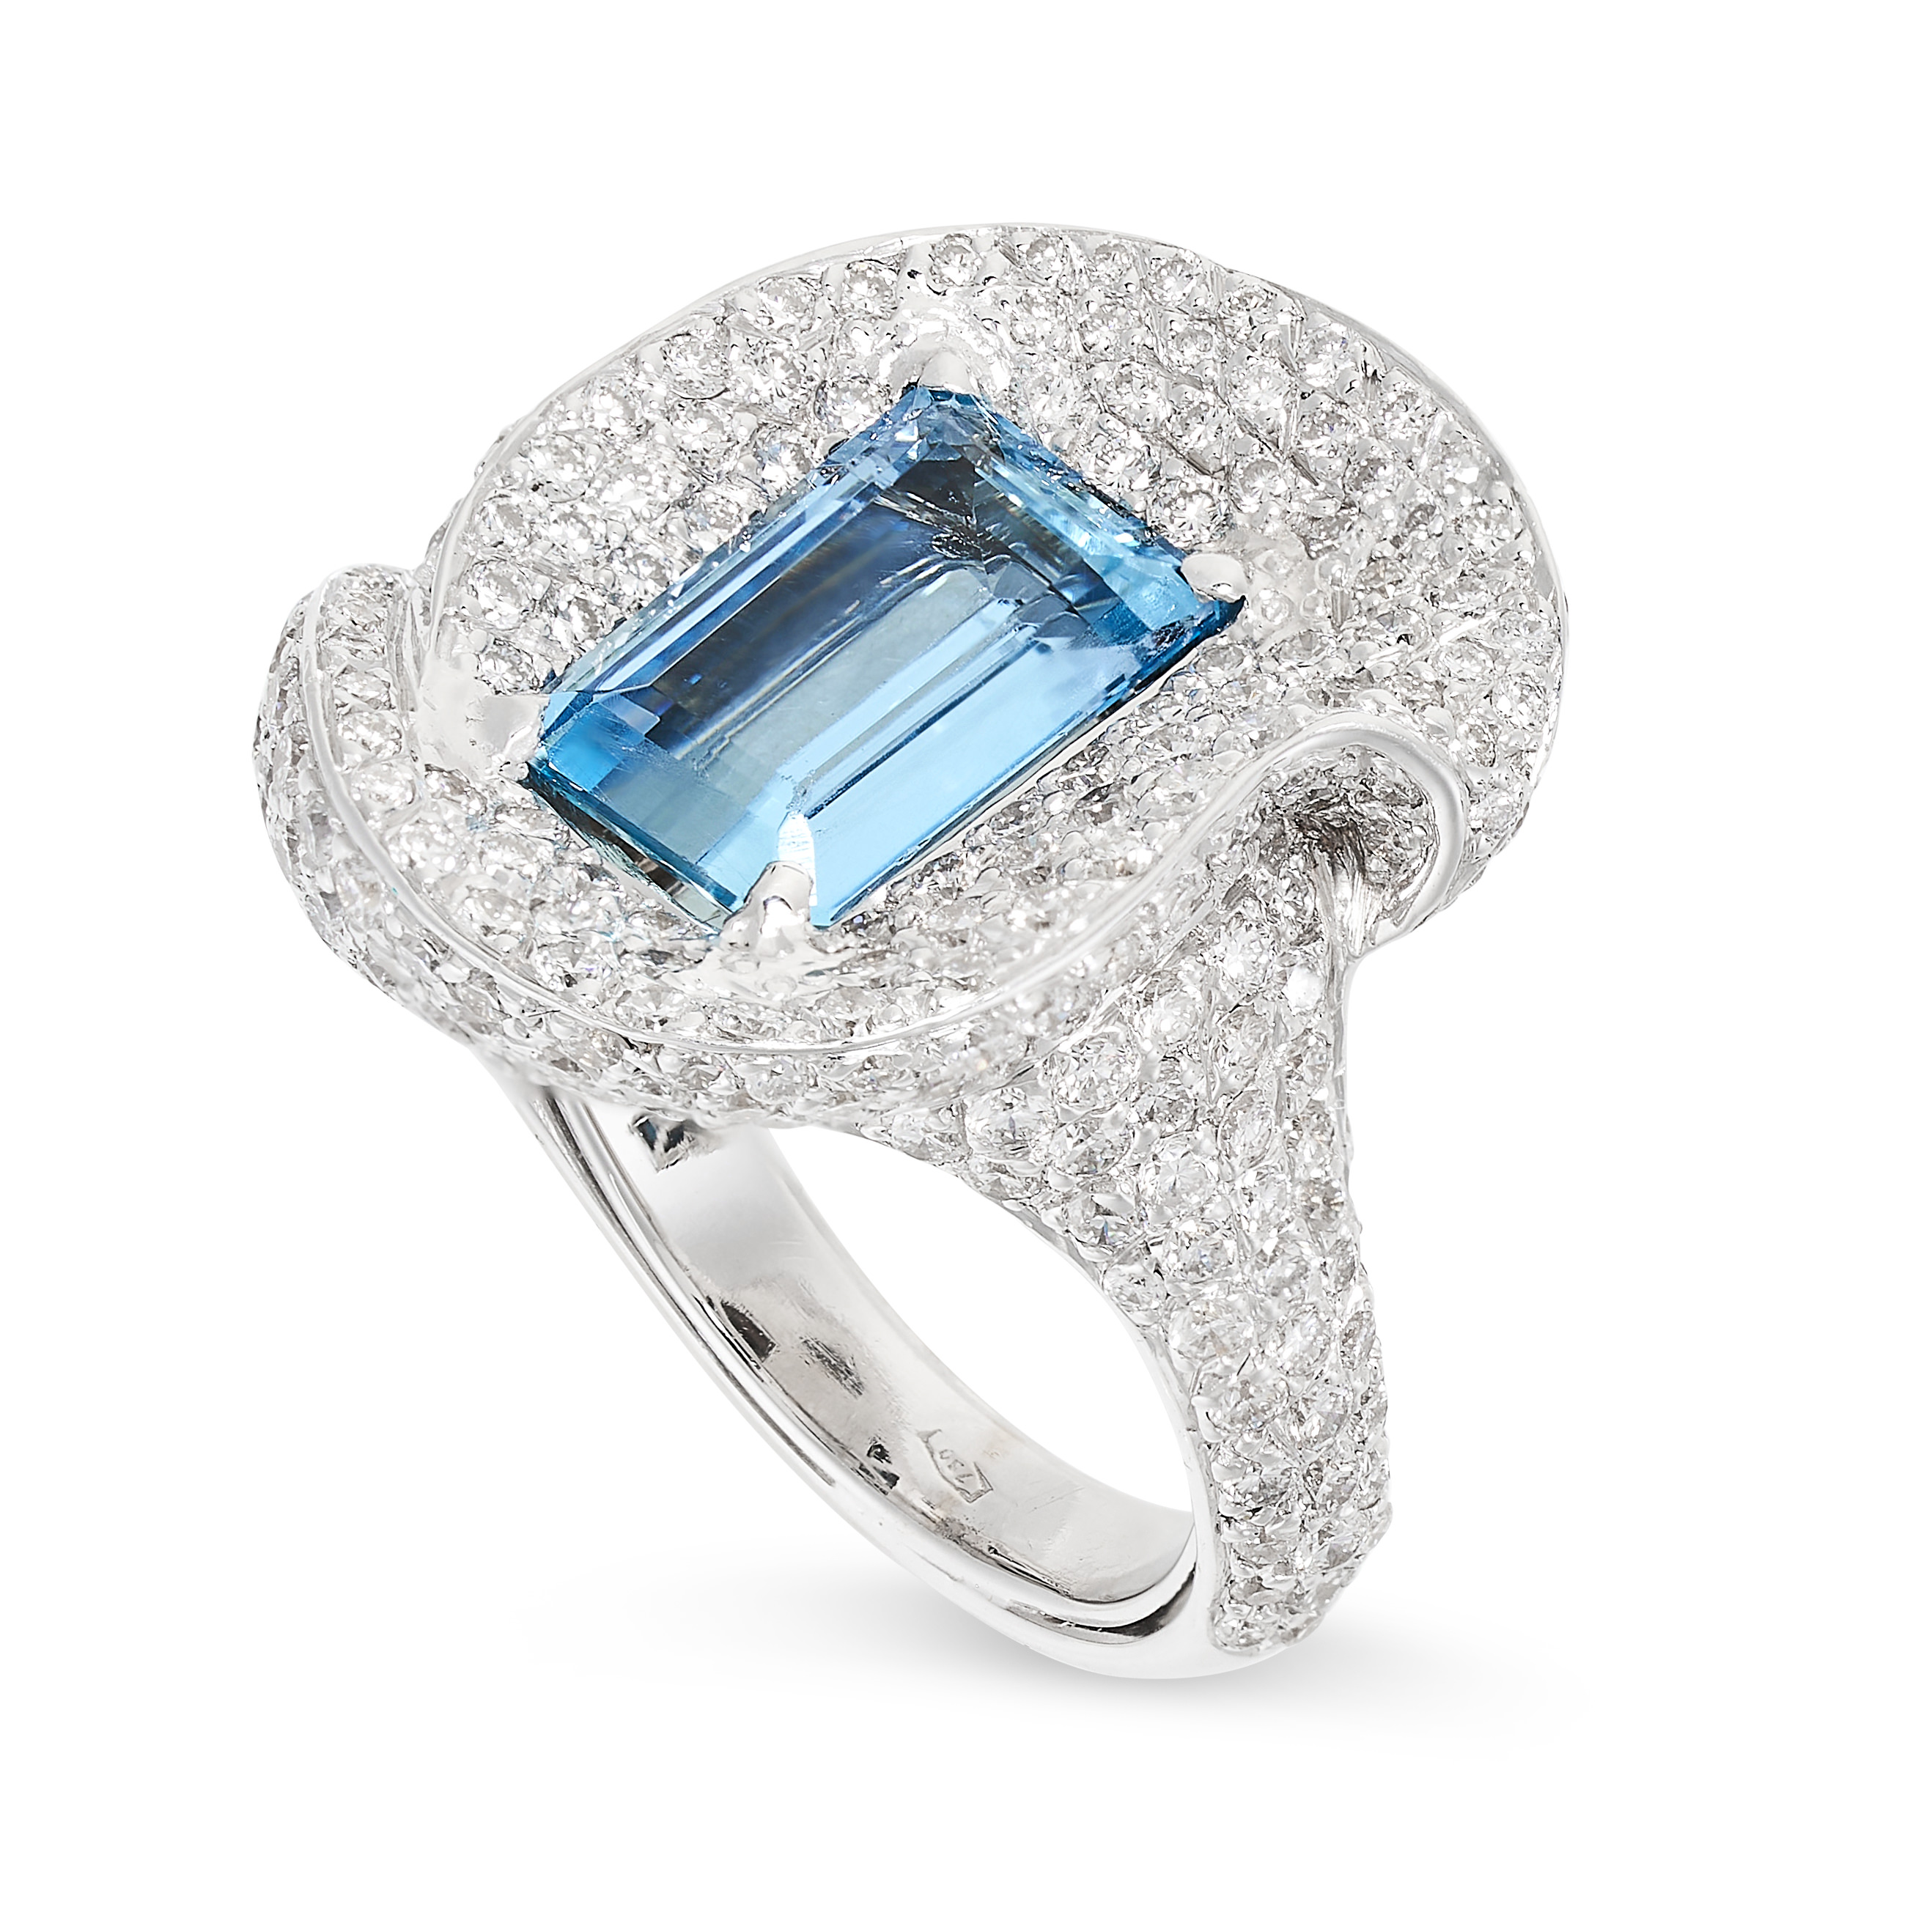 AN AQUAMARINE AND DIAMOND RING in 18ct white gold, set with a step cut aquamarine of 2.31 carats - Image 2 of 2